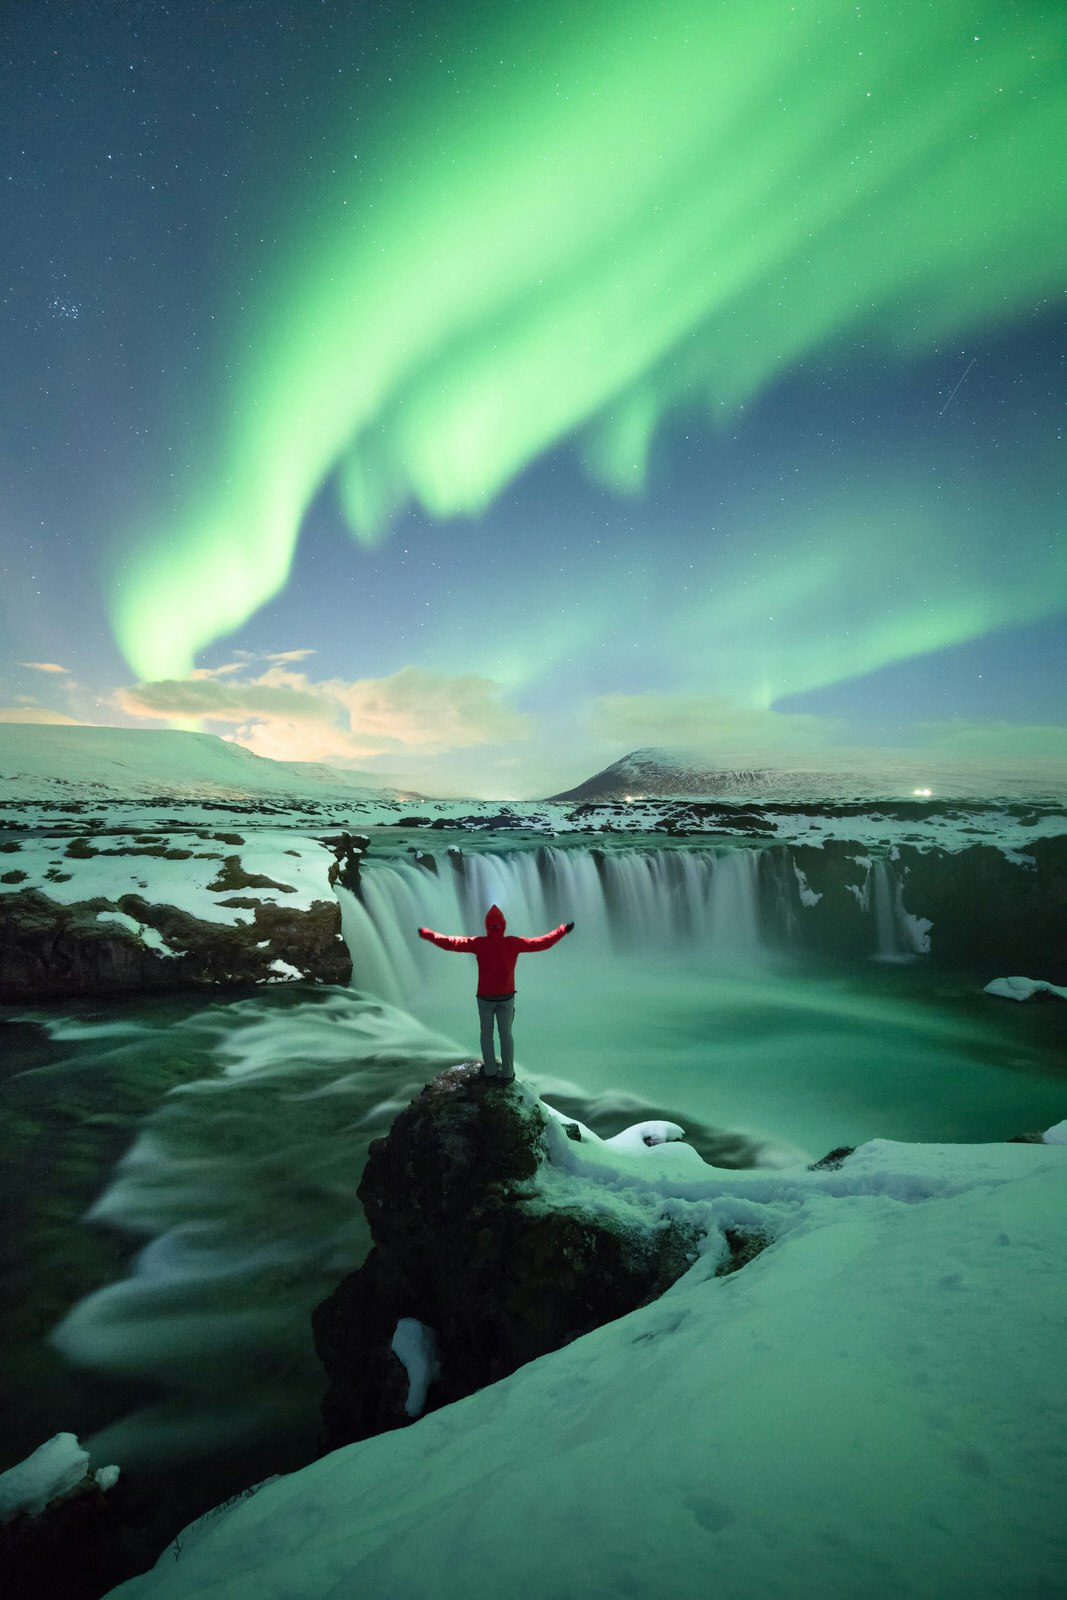 A-person-stands-with-arms-raised-on-a-rock-at-the-top-of-the-horseshoe-shaped-waterfall-Goðafoss-with-green-northern-lights-lighting-up-the-heavens © www.facebook.com / pete.lomchid / Getty Images